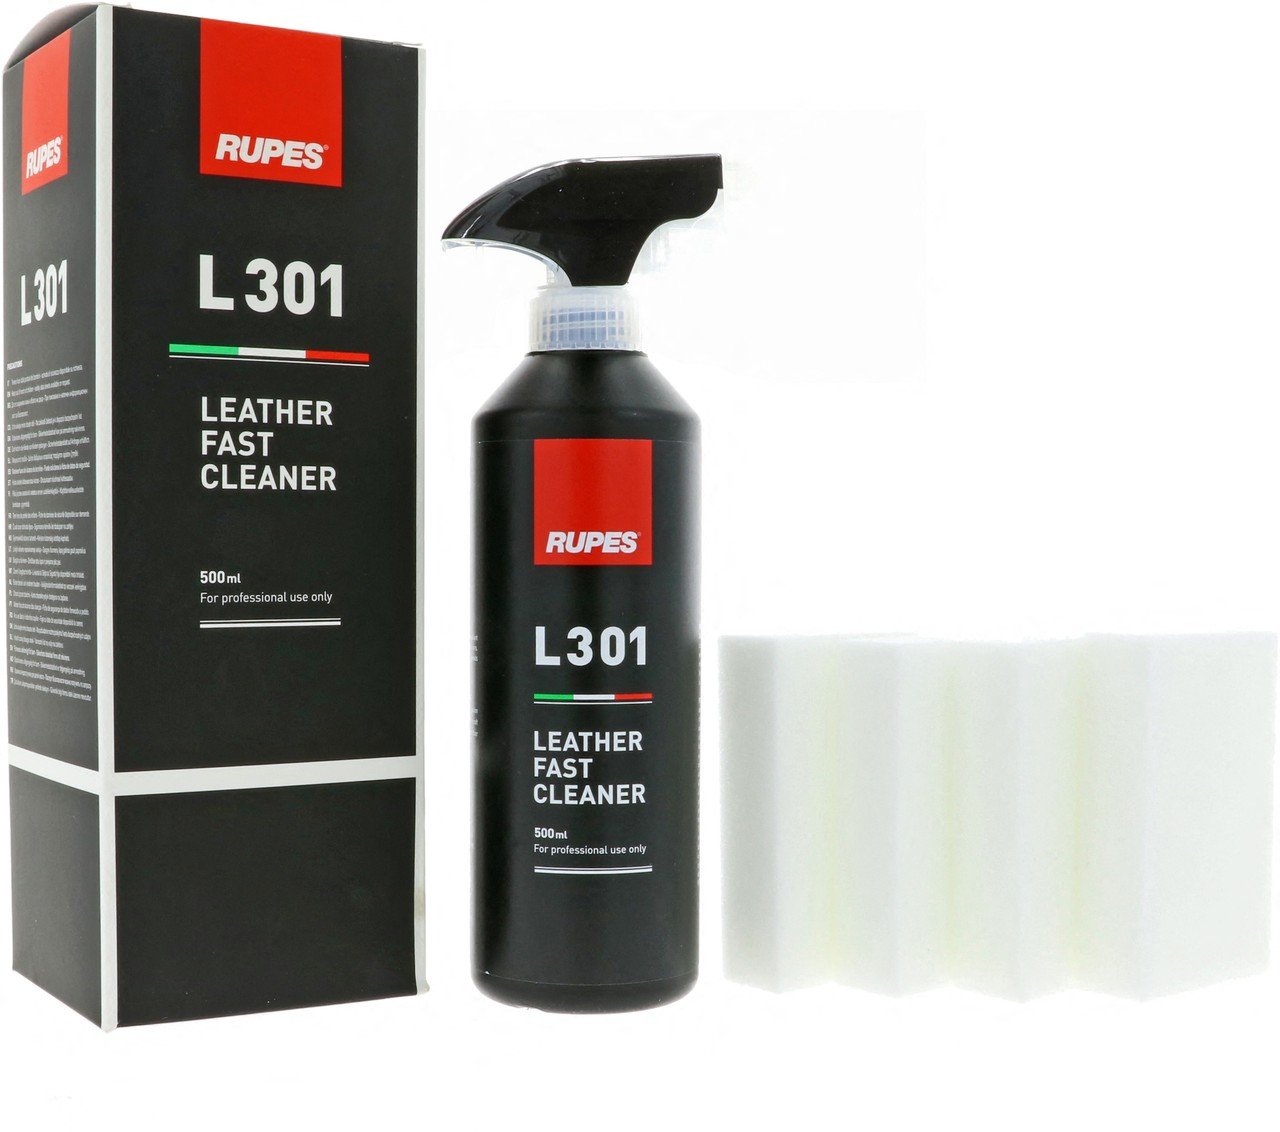 L301 Leather Fast Cleaner - 500ml